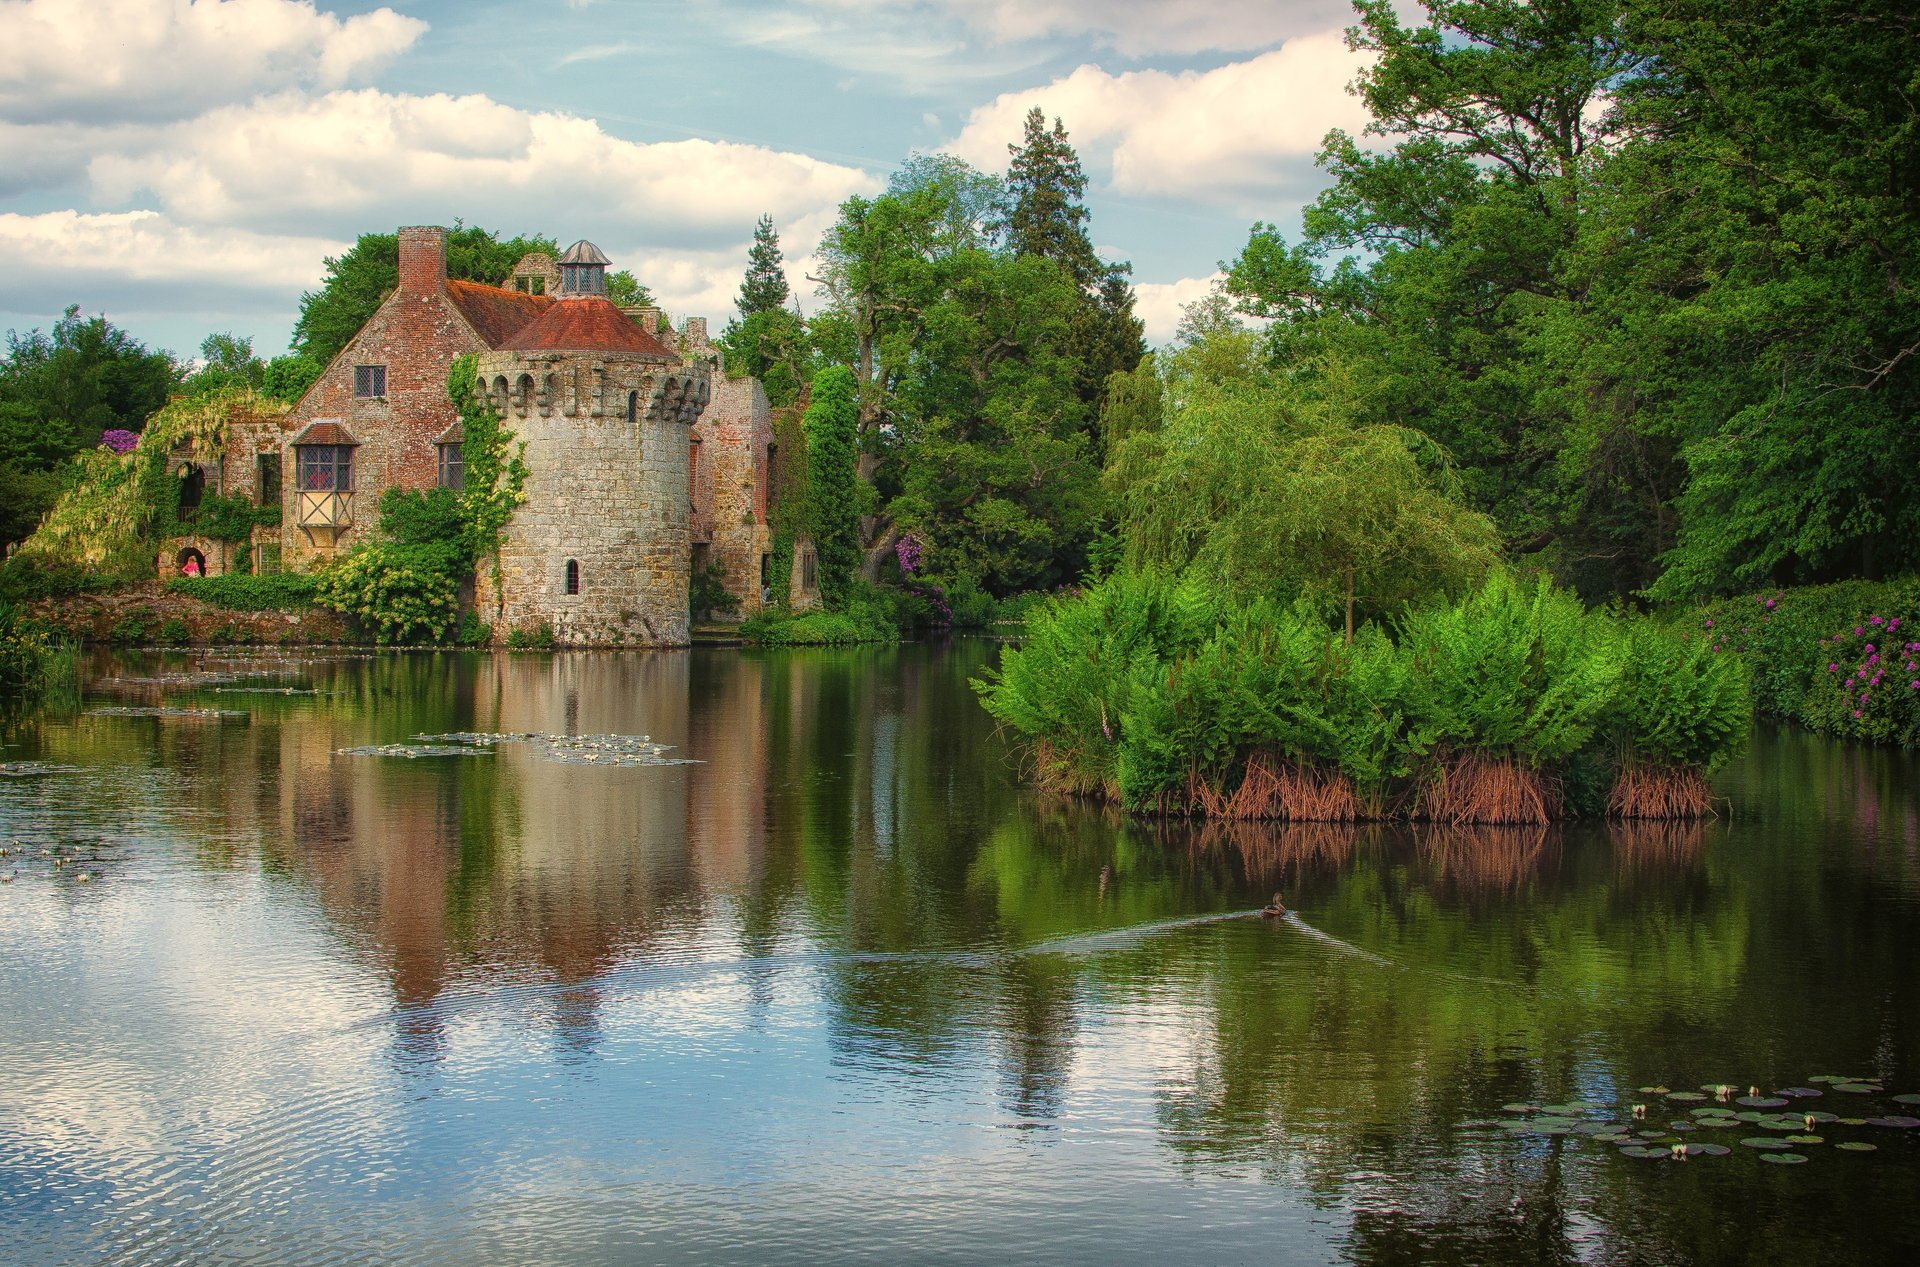 Old castle on the lake shore